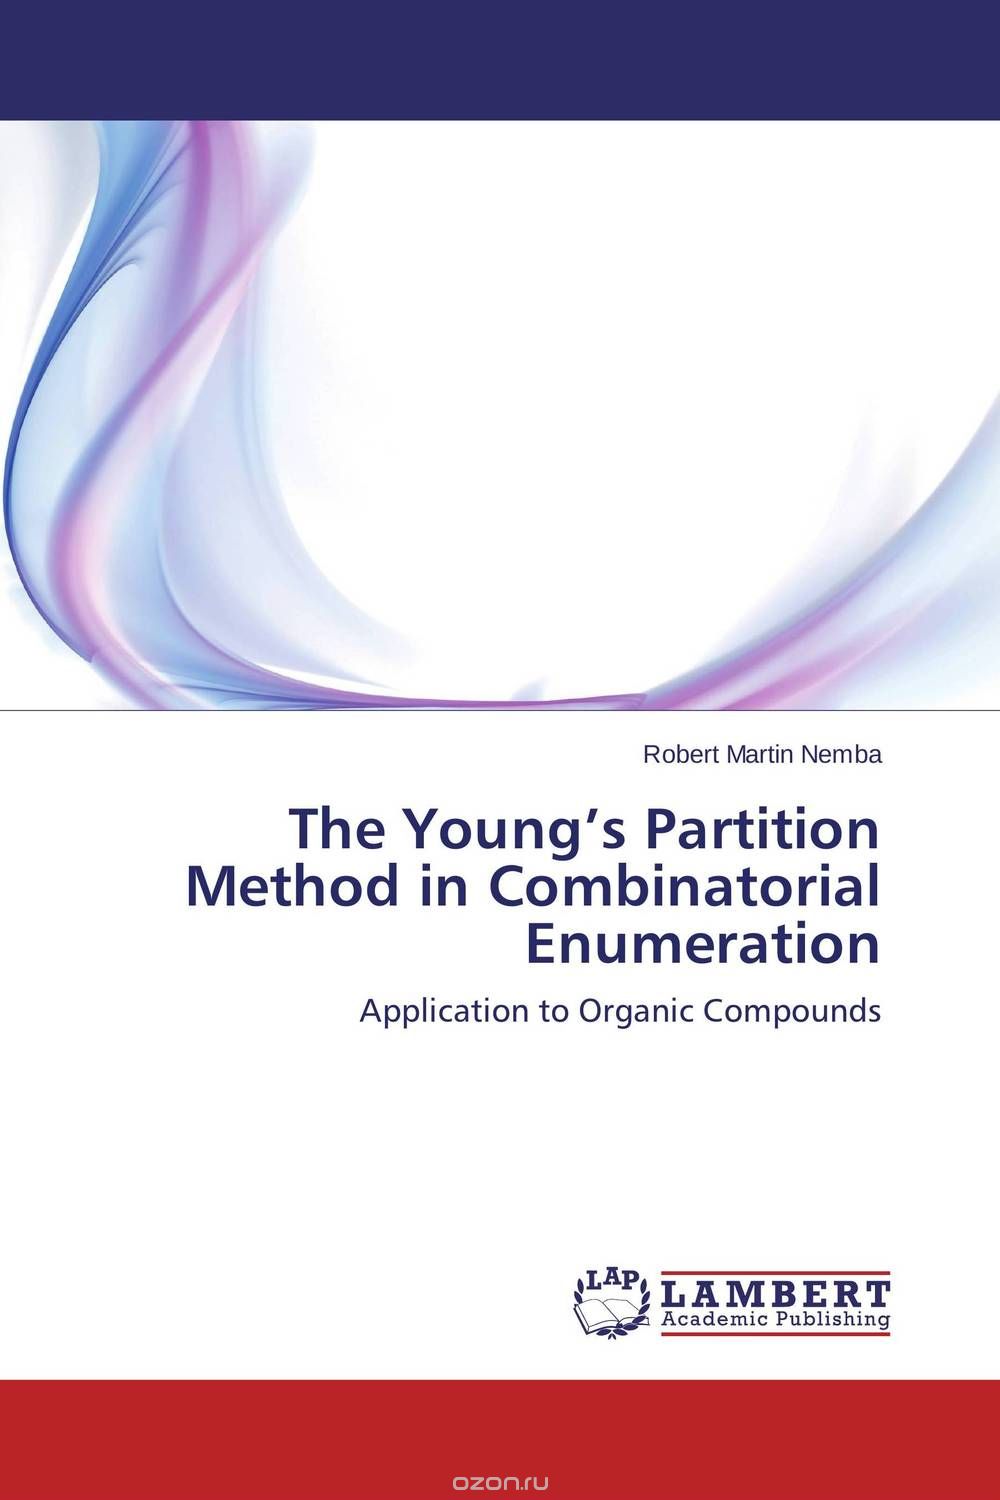 The Young’s Partition Method in Combinatorial Enumeration